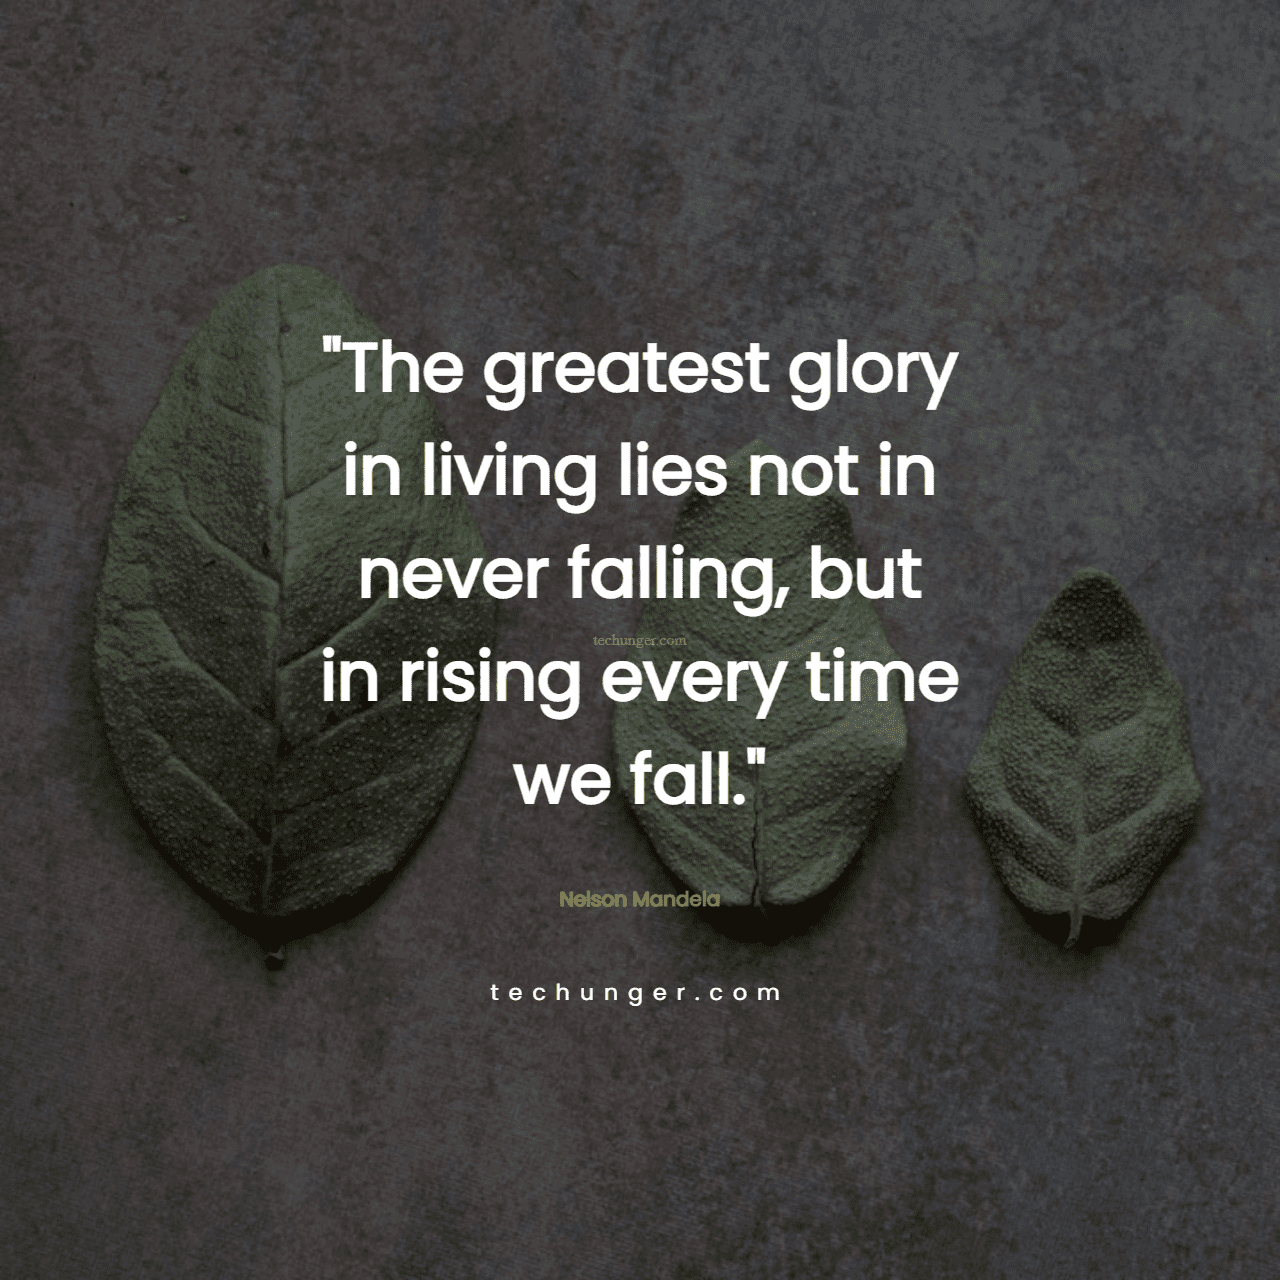 motivational,inspirational,quotes,
  The greatest glory in living lies not in never falling, but in rising every
  time we fall.Nelson Mandela
